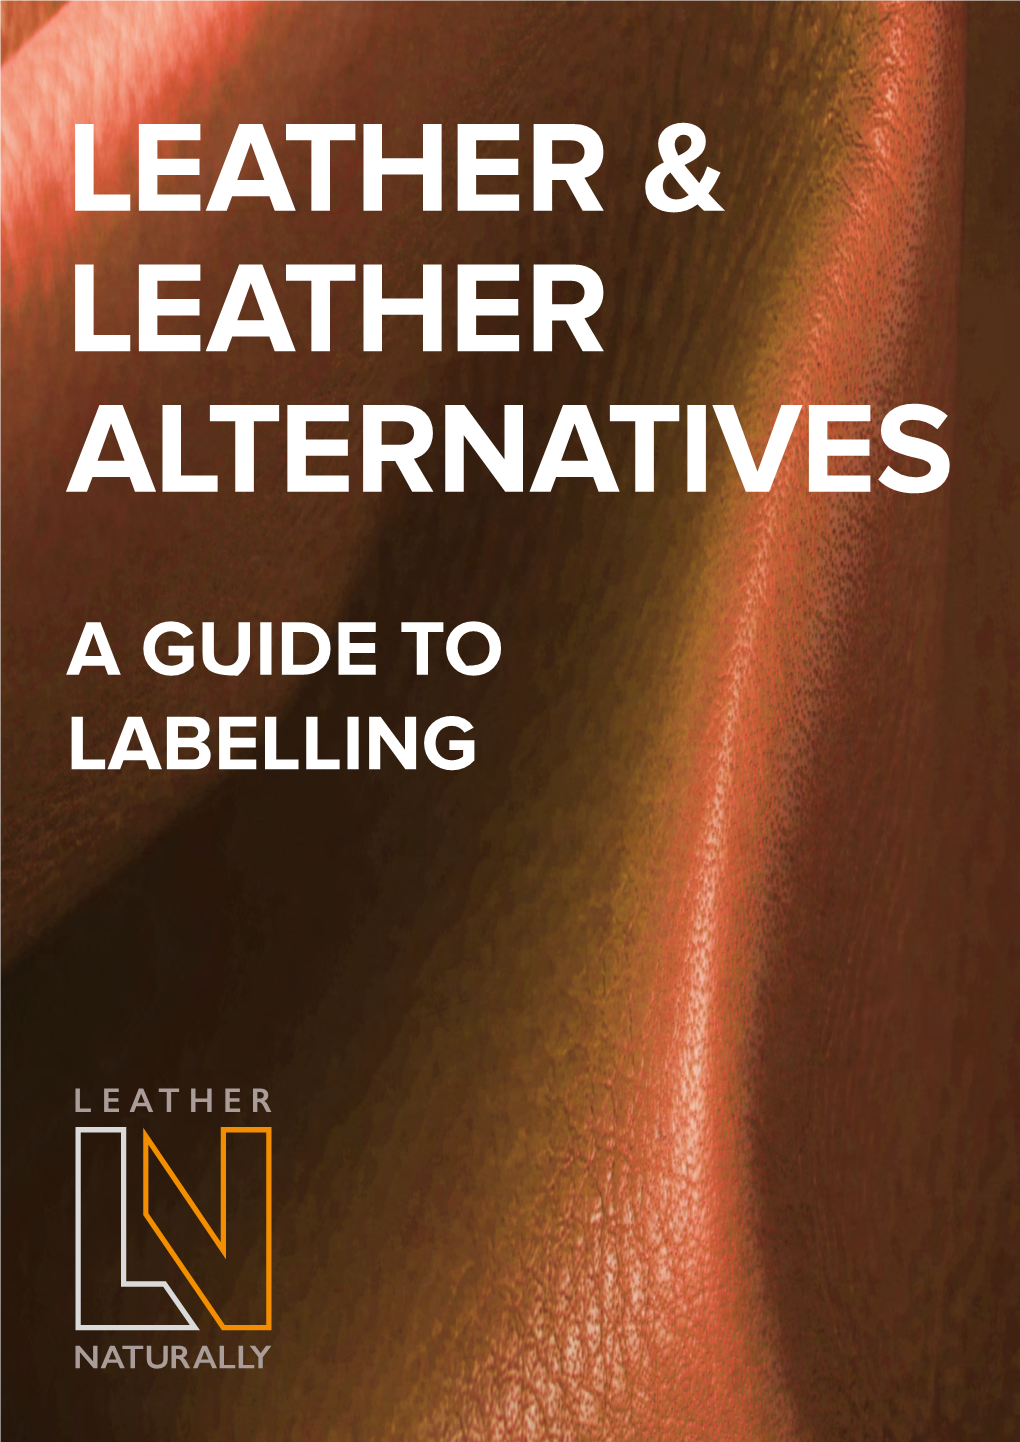 A Guide to Labelling When Is Leather Not Leather? Different Materials Have Different Benefits, but Labels Can Be Confusing